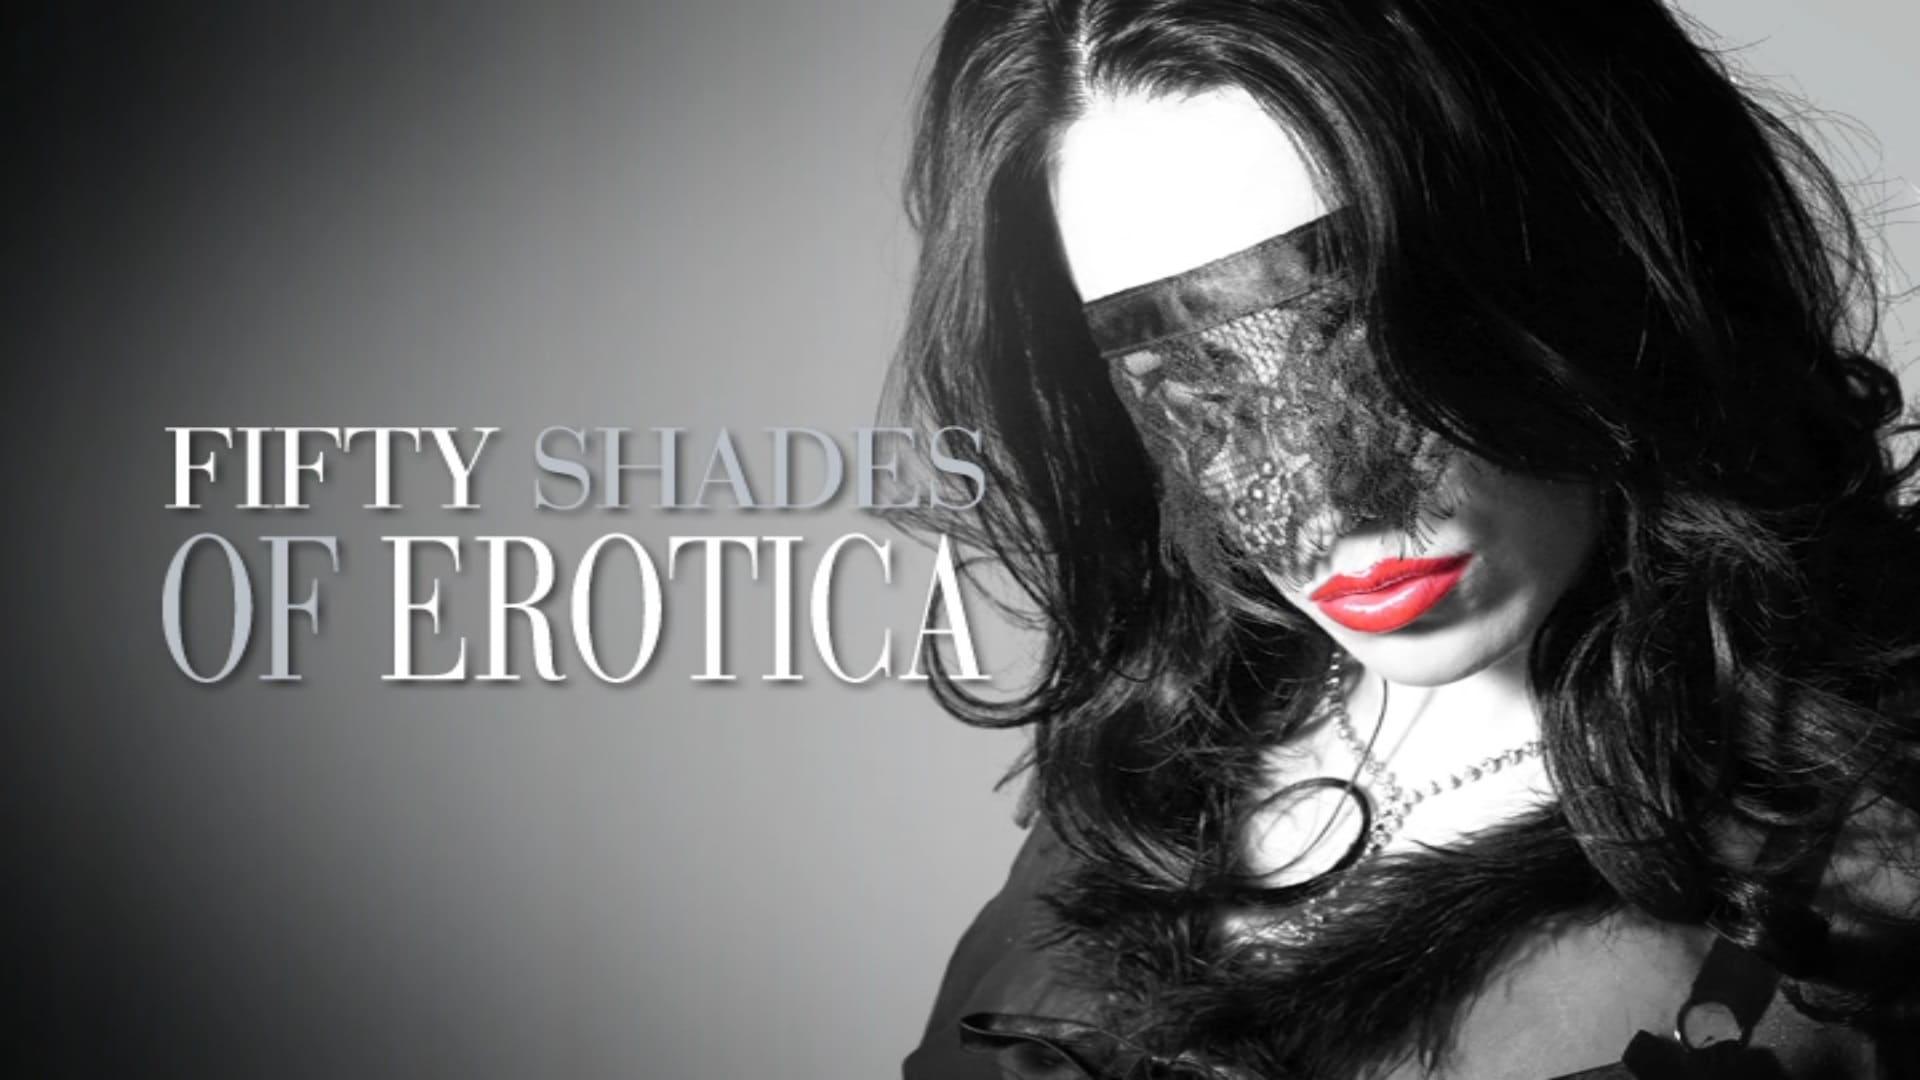 Fifty Shades of Erotica backdrop